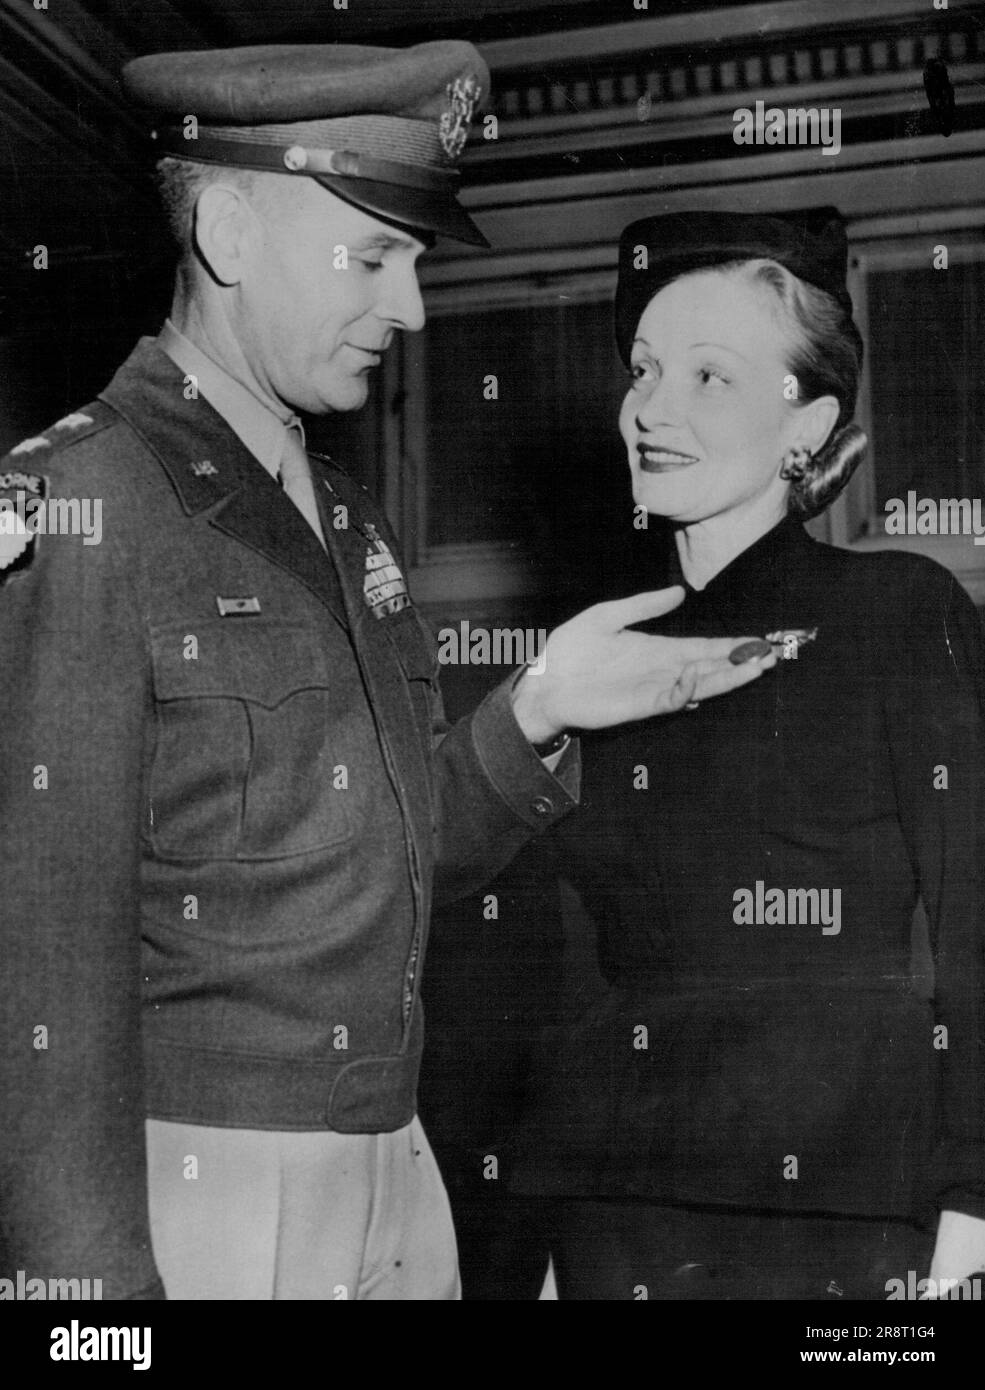 Marlene Honored For War Work -- Actress Marlene Dietrich Smiles as Maj. Gen. Maxwell D. Taylor, superintendent of the U.S. Military Academy at West point, Admires Medal for Freedom he pinned on her for her work in Entertaining Troops overseas during the War. Award Ceremony took Place in Cullum Memorial Hall at West Point, Nov. 18. November 19, 1947. (Photo by Associated Press Photo). Stock Photo